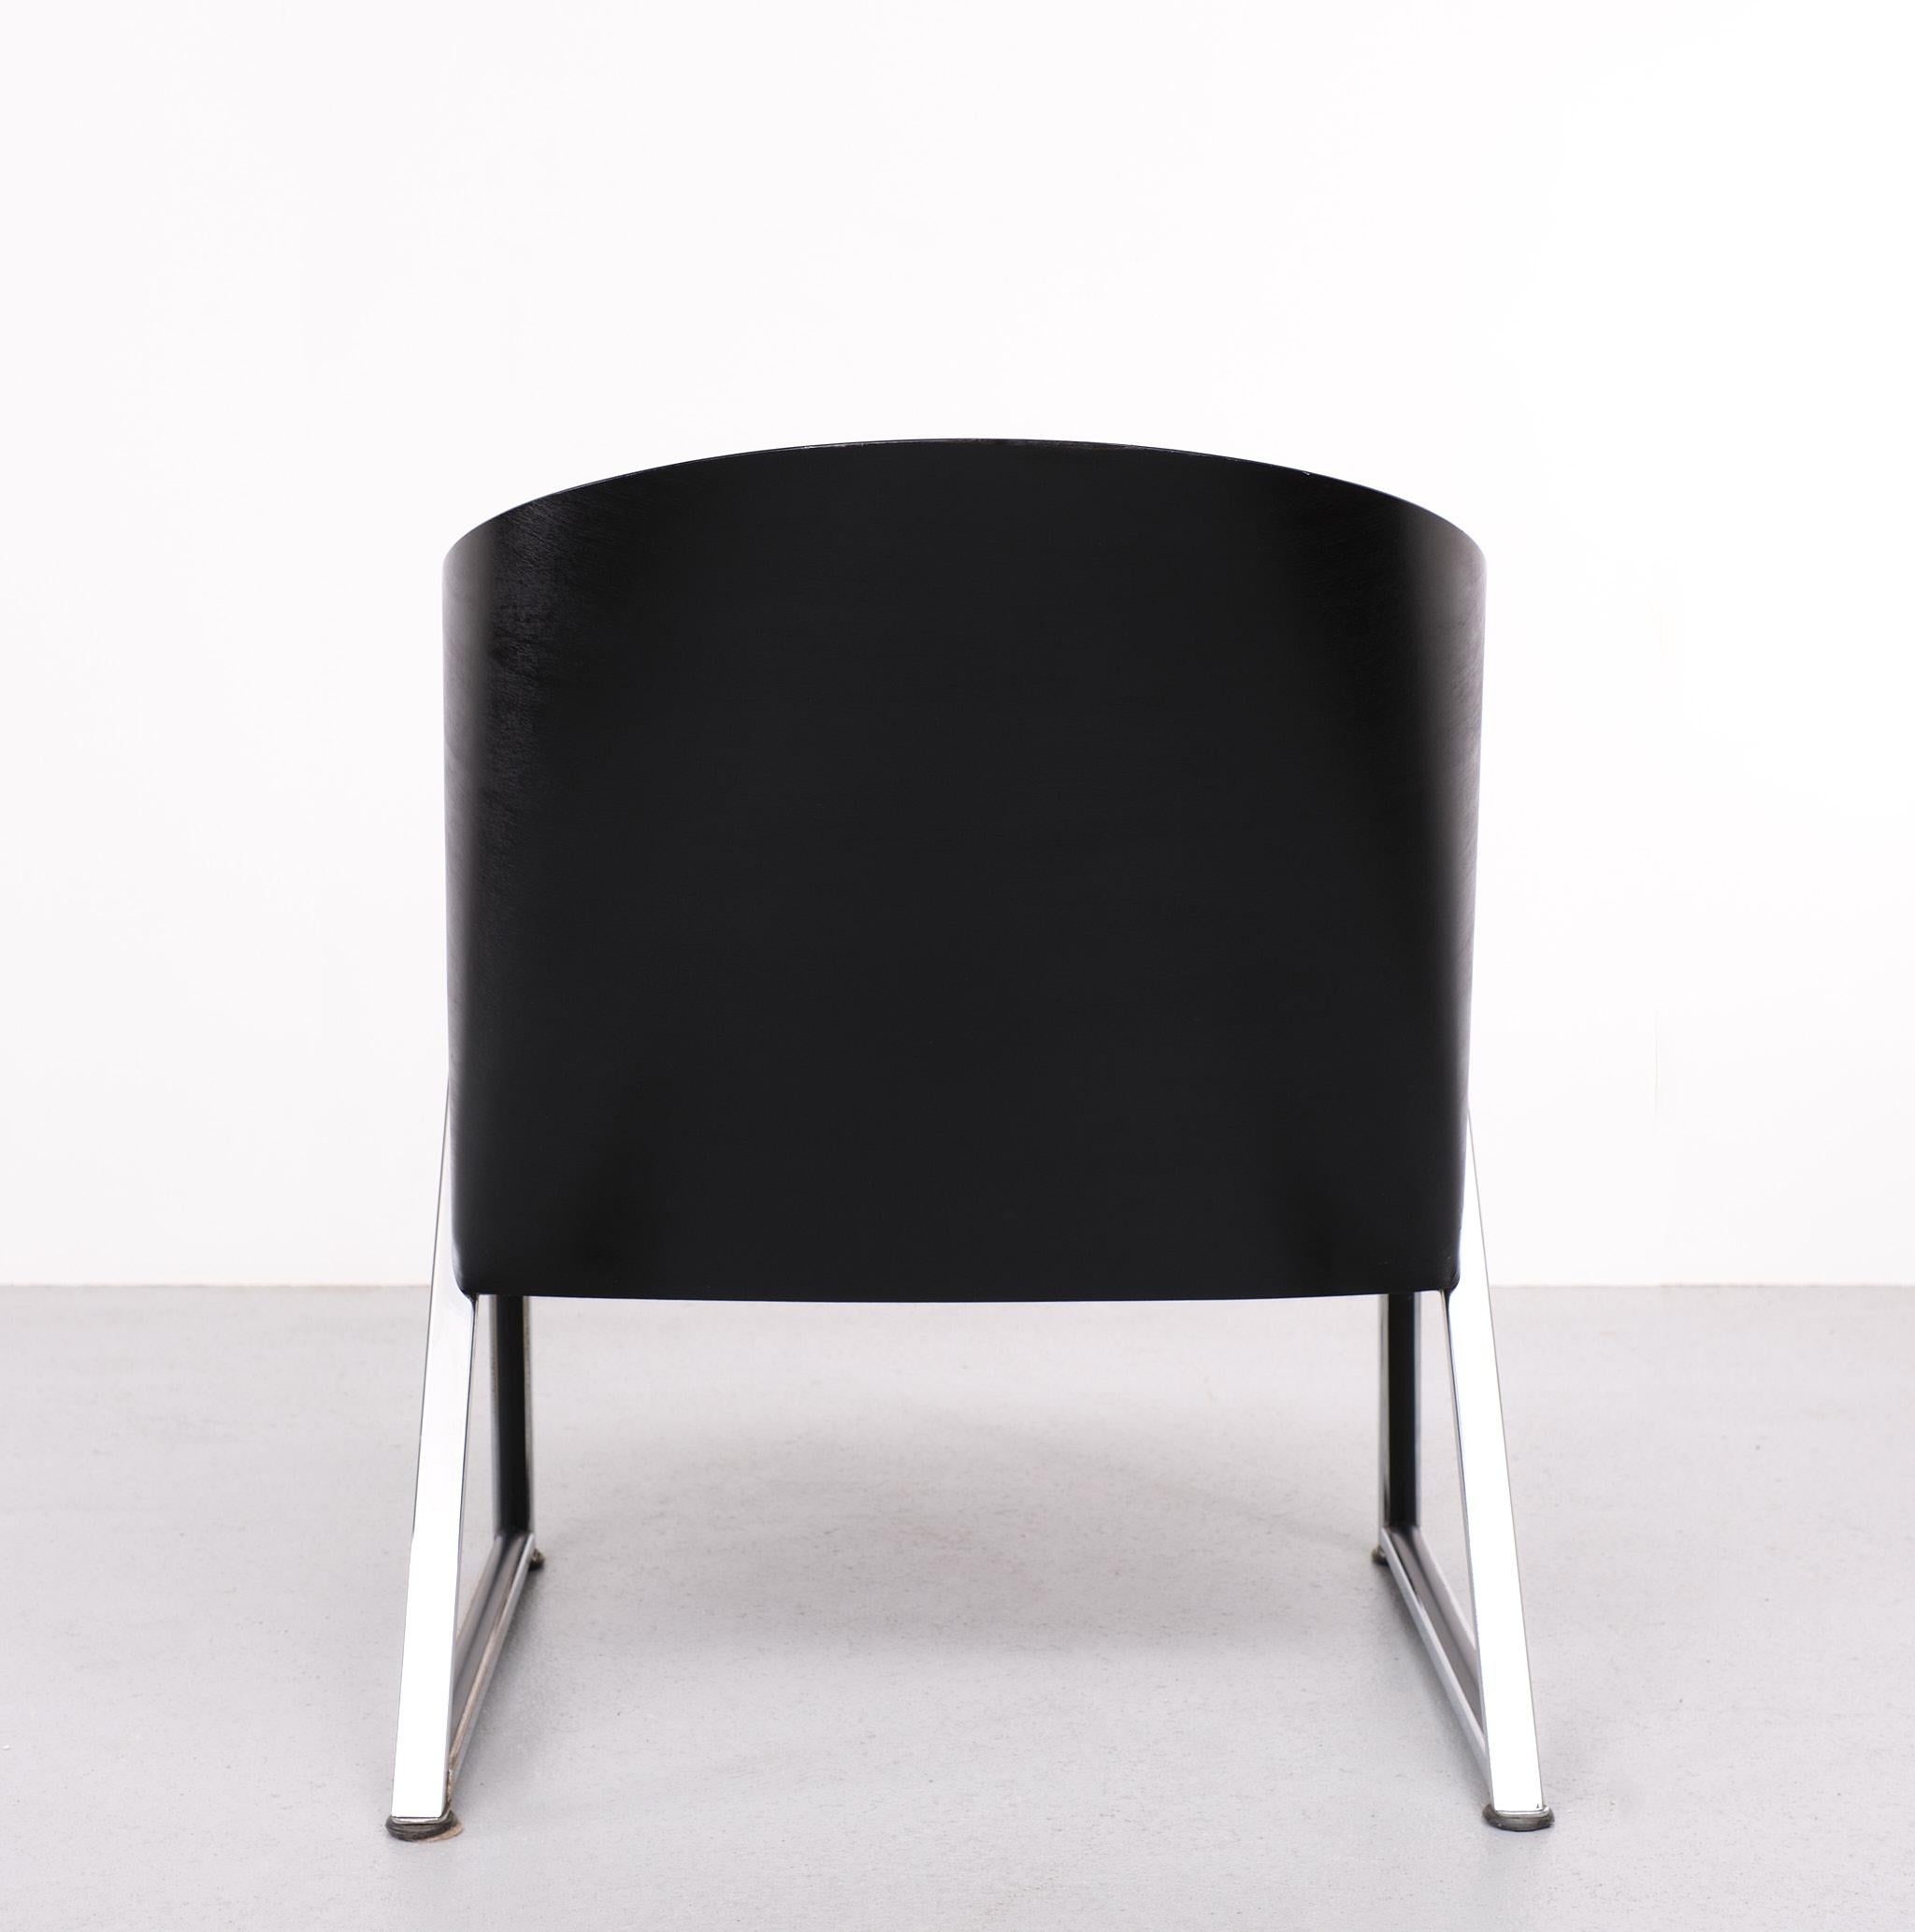 Post-Modern Mondi Soft Chair by Jouko Jarvisalo for Inno OY, Finland, 1980s